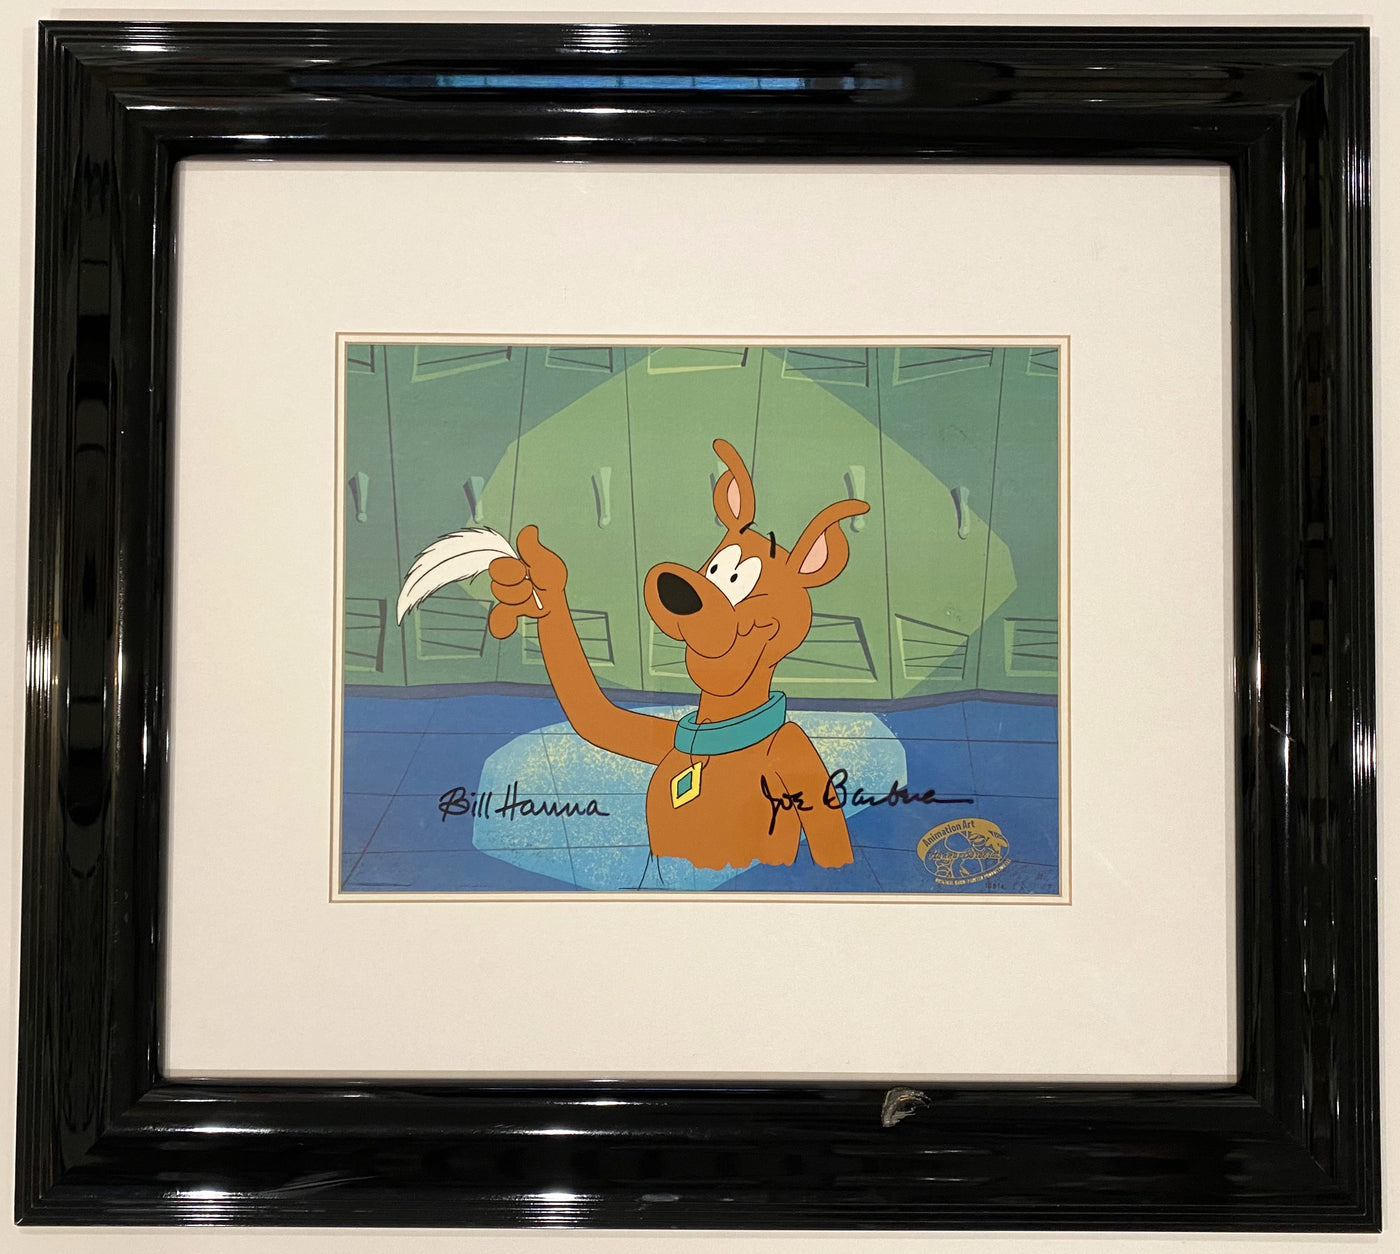 Original Hanna Barbera Production Cel from A Pup Named Scooby Doo Featuring Scooby Doo Signed by Bill Hanna and Joe Barbera